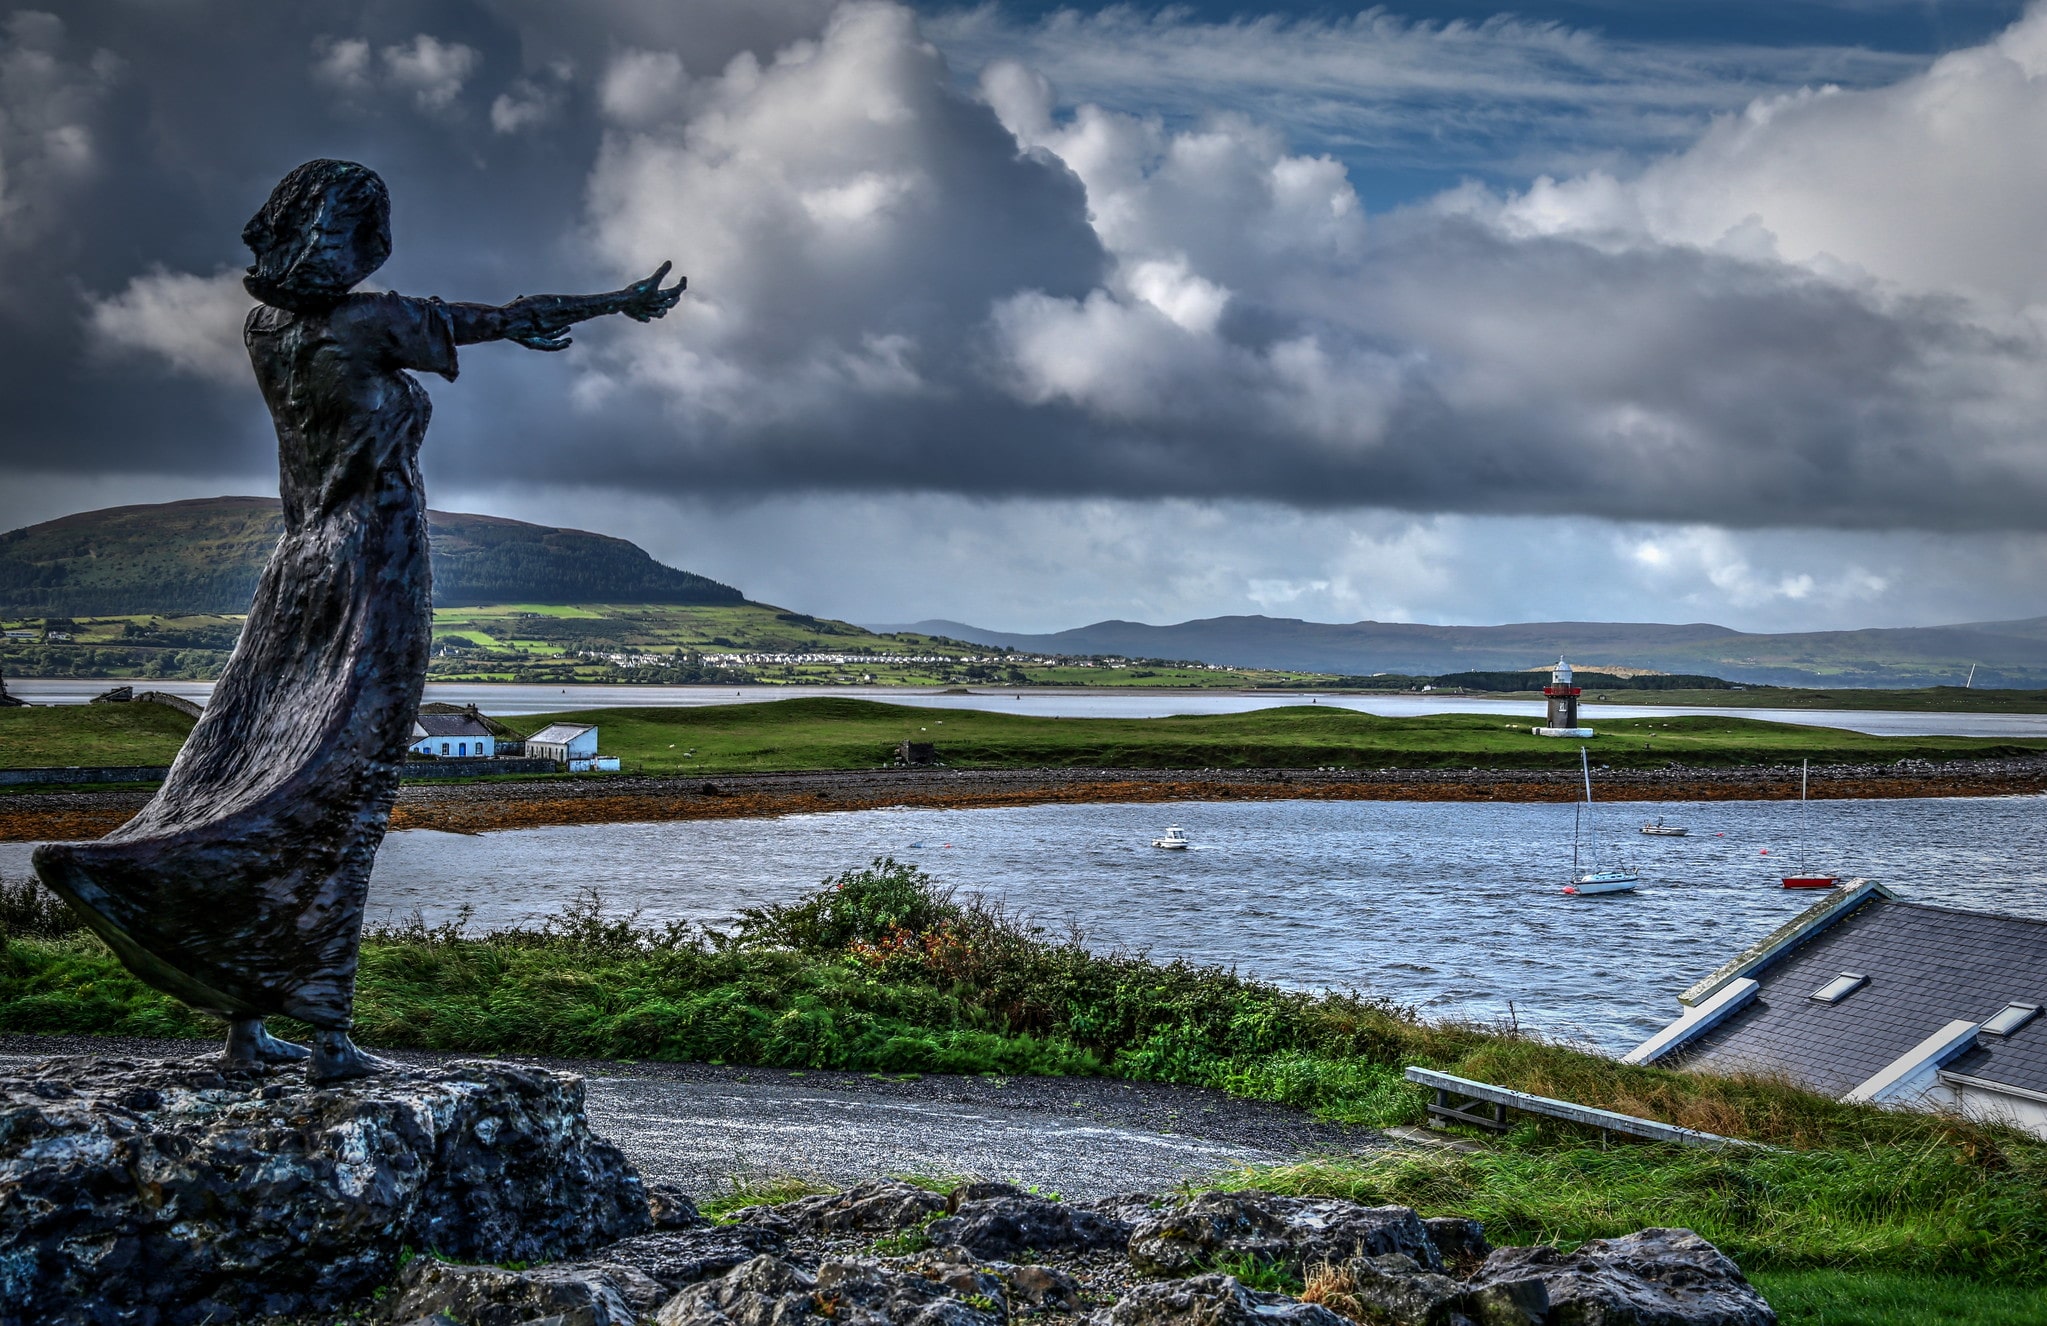 The town of Sligo is a cool place to visit for its ties to W.B. Yeats